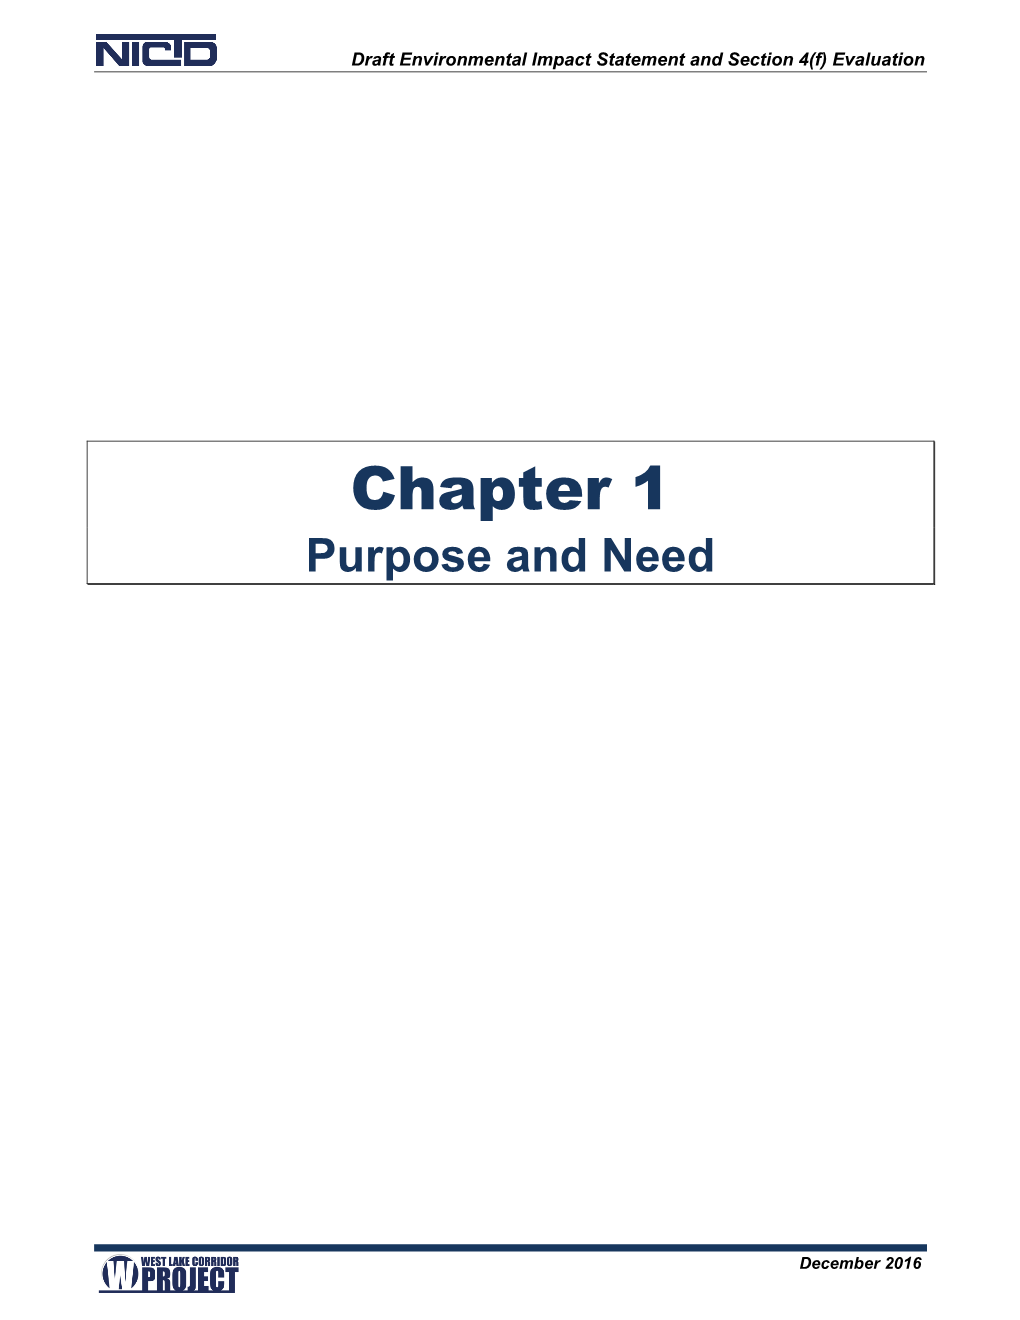 Chapter 1: Purpose and Need